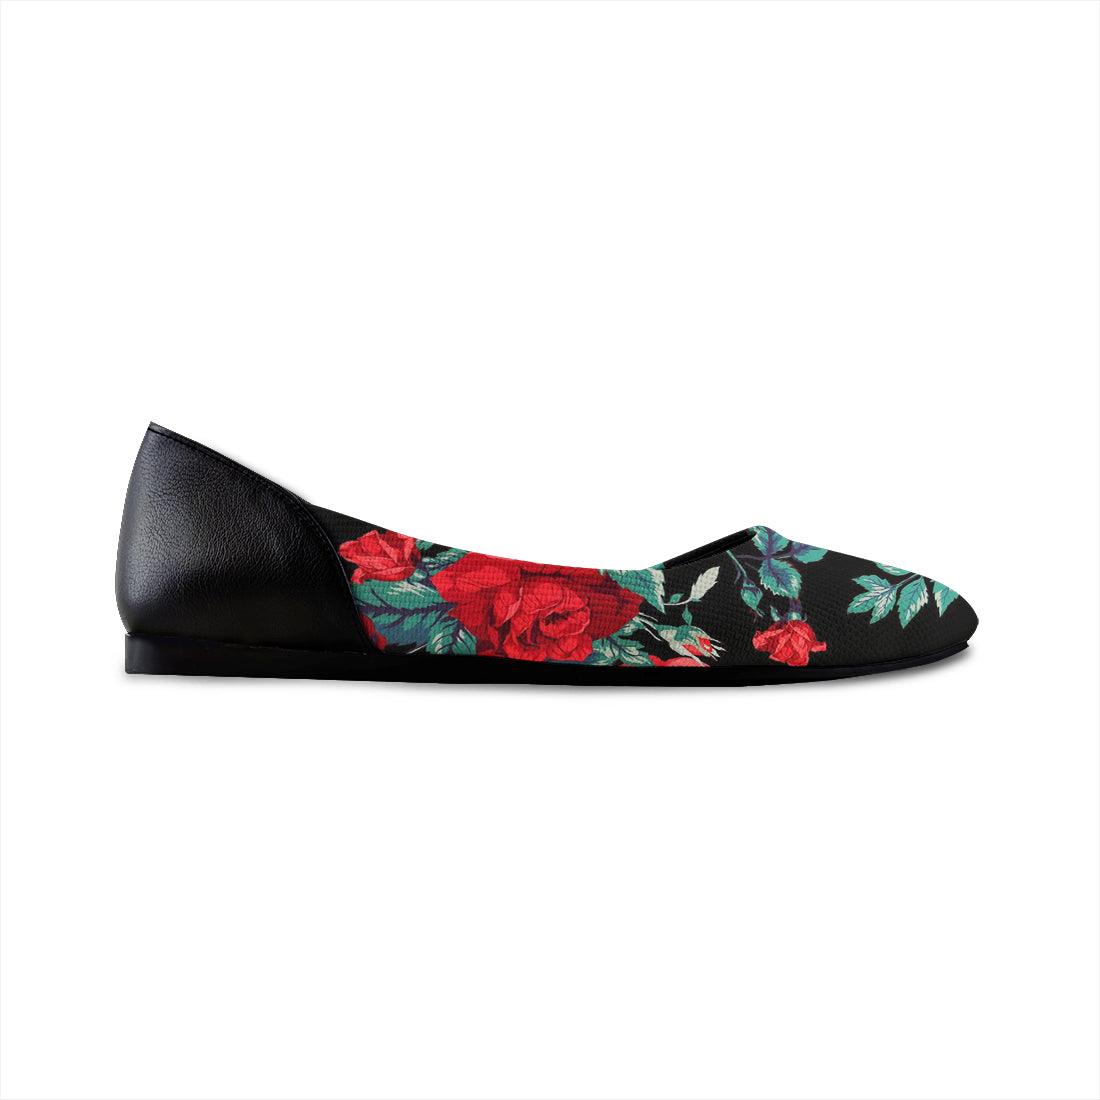 Flat Women's Shoes Flowers - CANVAEGYPT